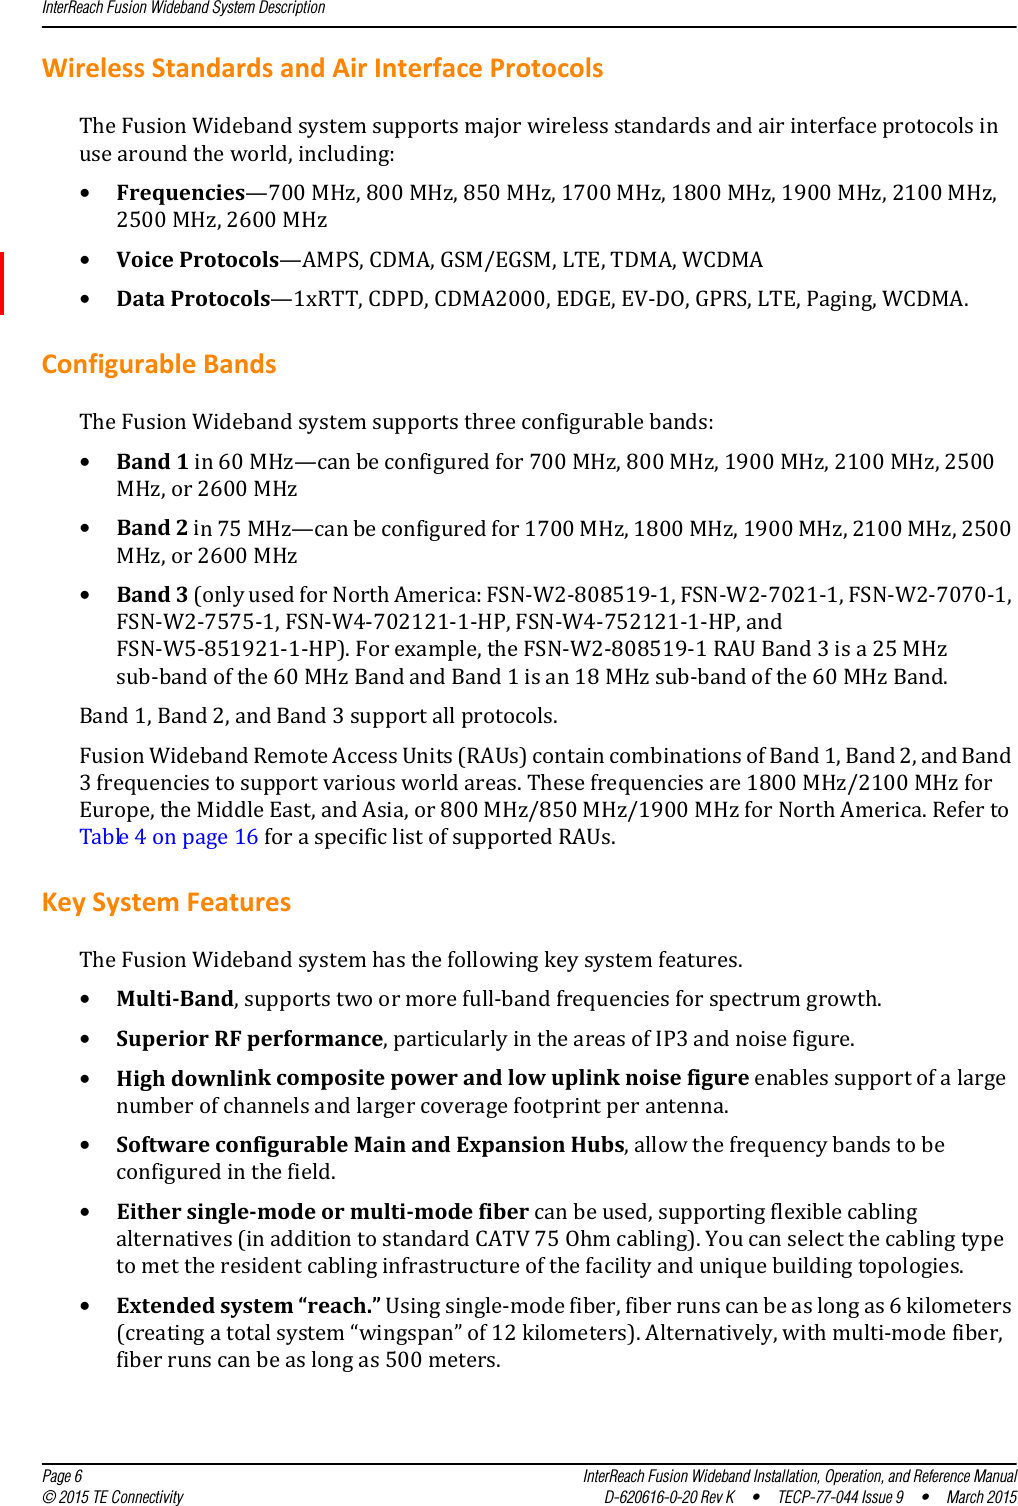 InterReach Fusion Wideband System Description  Page 6 InterReach Fusion Wideband Installation, Operation, and Reference Manual© 2015 TE Connectivity D-620616-0-20 Rev K  •  TECP-77-044 Issue 9  •  March 2015Wireless Standards and Air Interface ProtocolsThe Fusion Wideband system supports major wireless standards and air interface protocols in use around the world, including:•Frequencies—700 MHz, 800 MHz, 850 MHz, 1700 MHz, 1800 MHz, 1900 MHz, 2100 MHz, 2500 MHz, 2600 MHz•Voice Protocols—AMPS, CDMA, GSM/EGSM, LTE, TDMA, WCDMA•Data Protocols—1xRTT, CDPD, CDMA2000, EDGE, EV-DO, GPRS, LTE, Paging, WCDMA.Configurable BandsThe Fusion Wideband system supports three configurable bands:•Band 1 in 60 MHz—can be configured for 700 MHz, 800 MHz, 1900 MHz, 2100 MHz, 2500 MHz, or 2600 MHz•Band 2 in 75 MHz—can be configured for 1700 MHz, 1800 MHz, 1900 MHz, 2100 MHz, 2500 MHz, or 2600 MHz•Band 3 (only used for North America: FSN-W2-808519-1, FSN-W2-7021-1, FSN-W2-7070-1, FSN-W2-7575-1, FSN-W4-702121-1-HP, FSN-W4-752121-1-HP, and FSN-W5-851921-1-HP). For example, the FSN-W2-808519-1 RAU Band 3 is a 25 MHz sub-band of the 60 MHz Band and Band 1 is an 18 MHz sub-band of the 60 MHz Band.Band 1, Band 2, and Band 3 support all protocols.Fusion Wideband Remote Access Units (RAUs) contain combinations of Band 1, Band 2, and Band 3 frequencies to support various world areas. These frequencies are 1800 MHz/2100 MHz for Europe, the Middle East, and Asia, or 800 MHz/850 MHz/1900 MHz for North America. Refer to Table 4 on page 16 for a specific list of supported RAUs.Key System FeaturesThe Fusion Wideband system has the following key system features.•Multi-Band, supports two or more full-band frequencies for spectrum growth.•Superior RF performance, particularly in the areas of IP3 and noise figure.•High downlink composite power and low uplink noise figure enables support of a large number of channels and larger coverage footprint per antenna.•Software configurable Main and Expansion Hubs, allow the frequency bands to be configured in the field.•Either single-mode or multi-mode fiber can be used, supporting flexible cabling alternatives (in addition to standard CATV 75 Ohm cabling). You can select the cabling type to met the resident cabling infrastructure of the facility and unique building topologies.•Extended system “reach.” Using single-mode fiber, fiber runs can be as long as 6 kilometers (creating a total system “wingspan” of 12 kilometers). Alternatively, with multi-mode fiber, fiber runs can be as long as 500 meters.